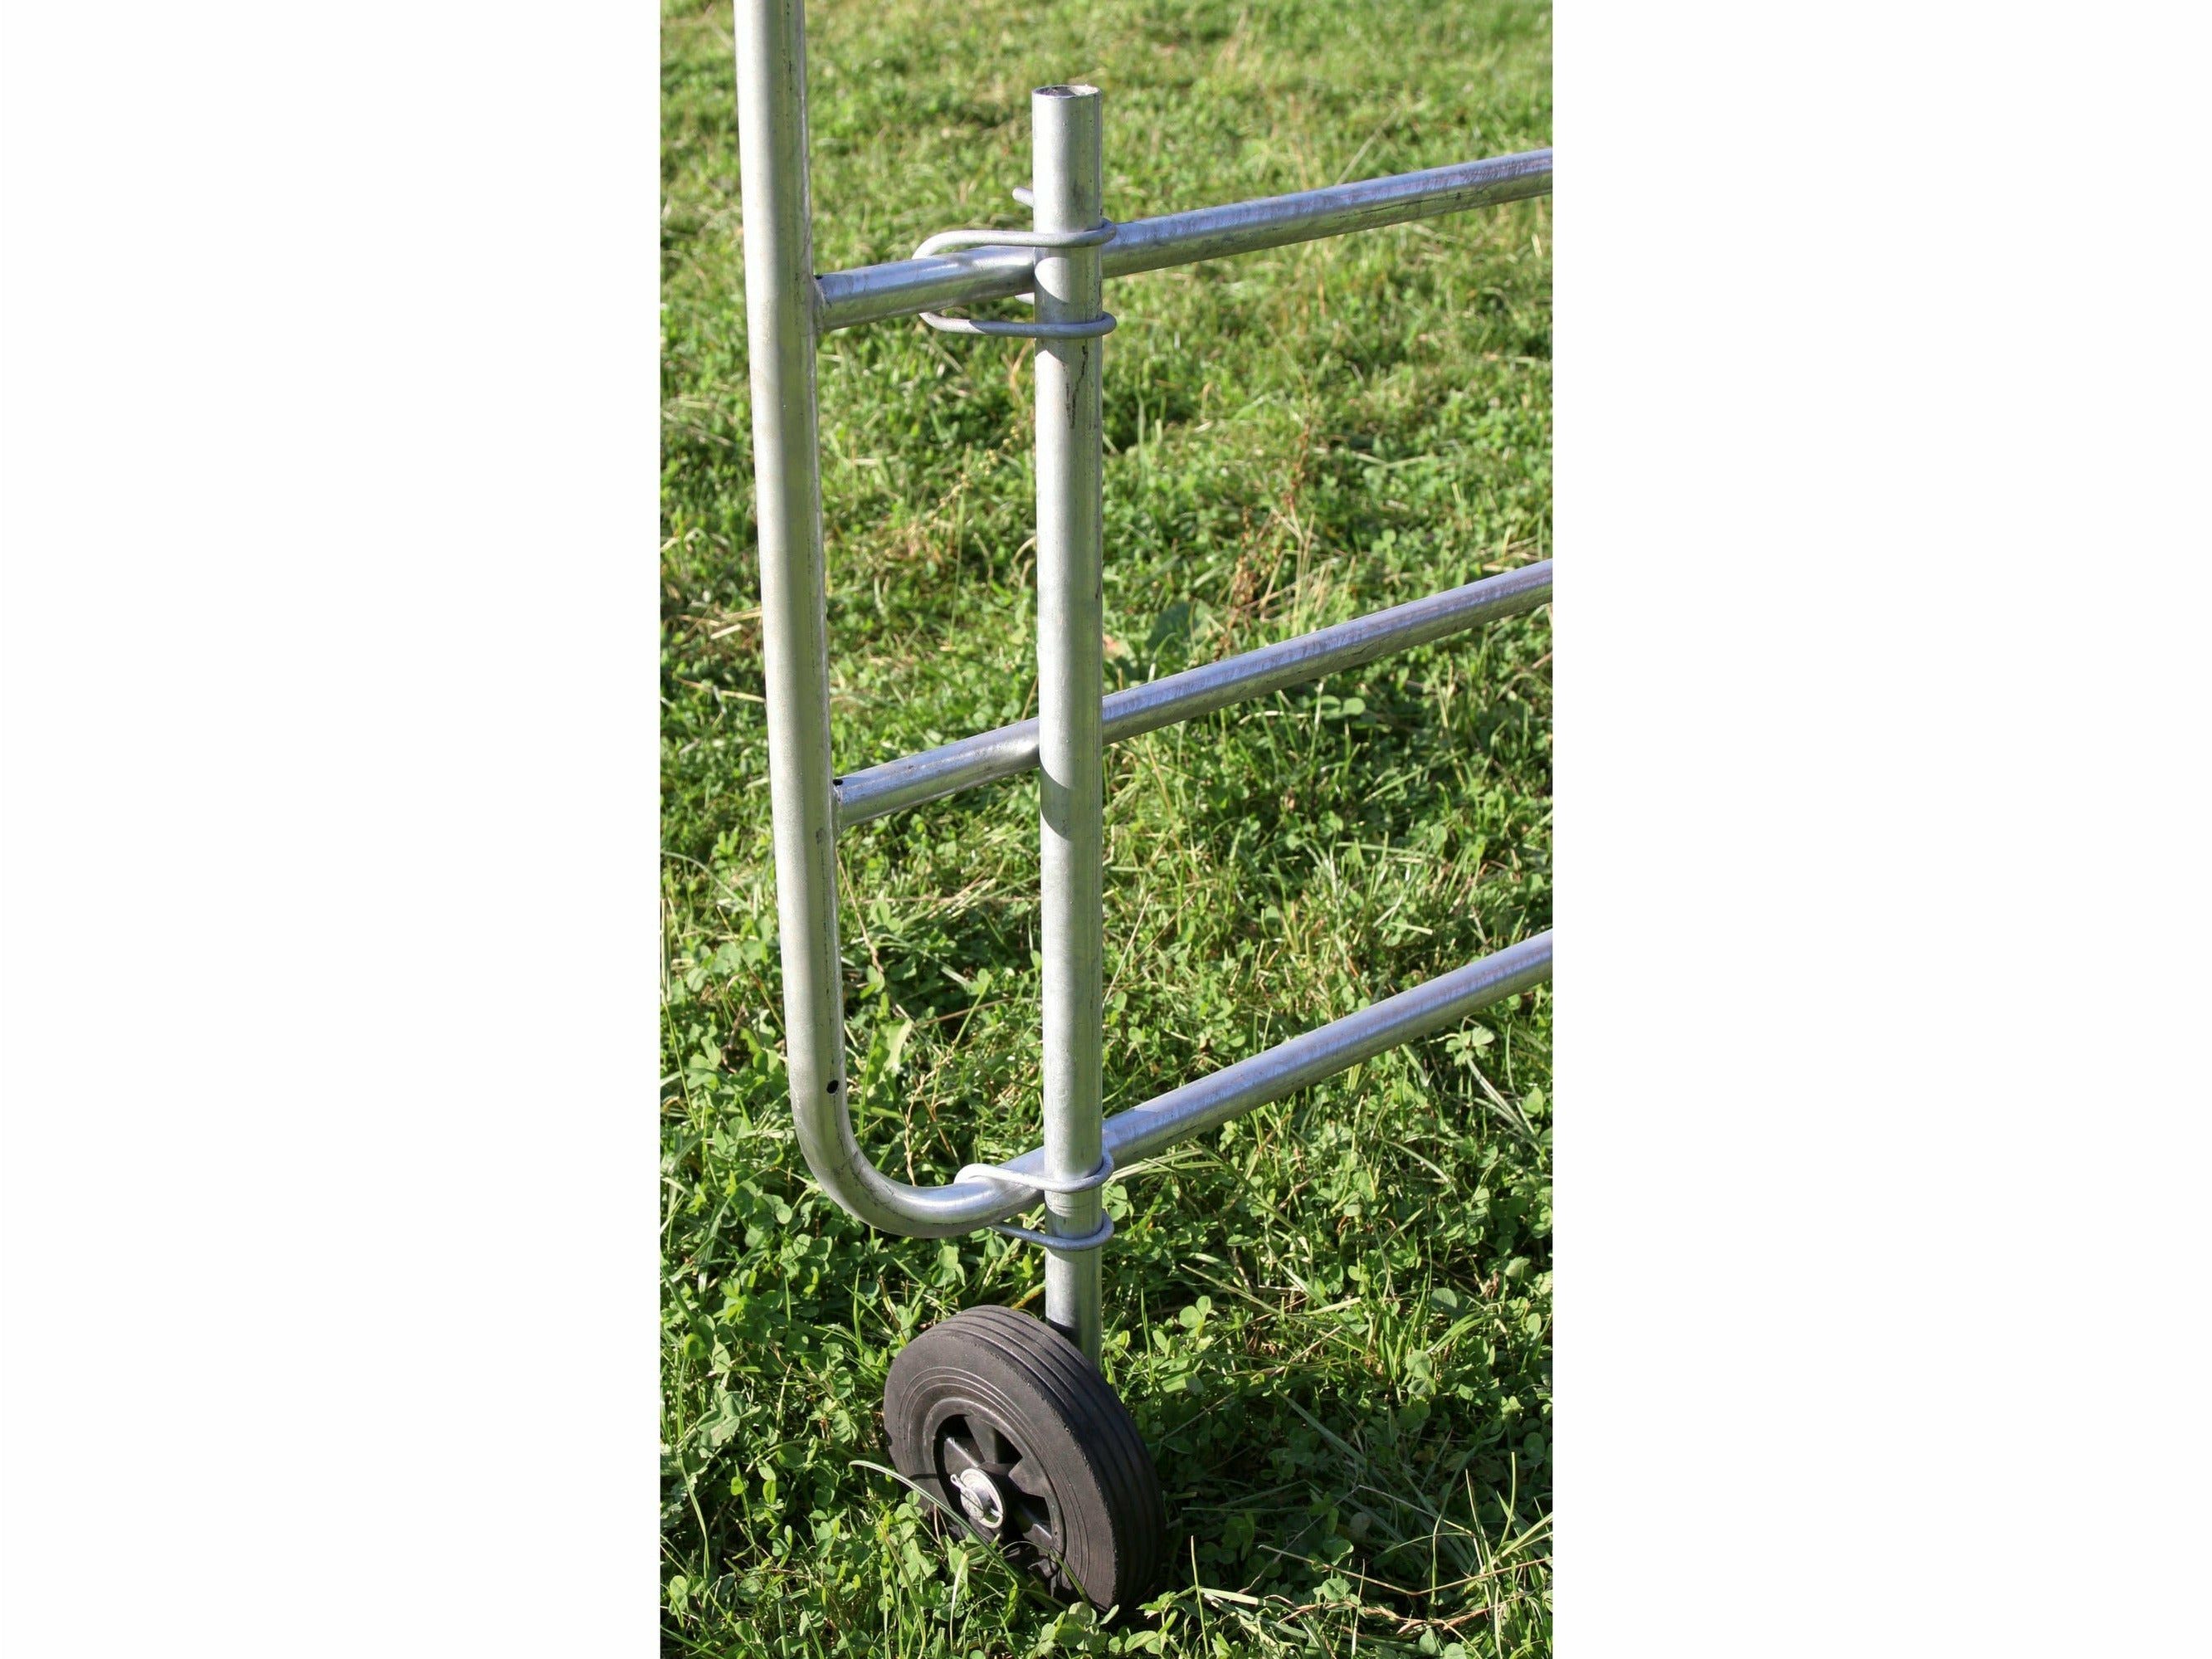 KERBL support wheel for pasture gates